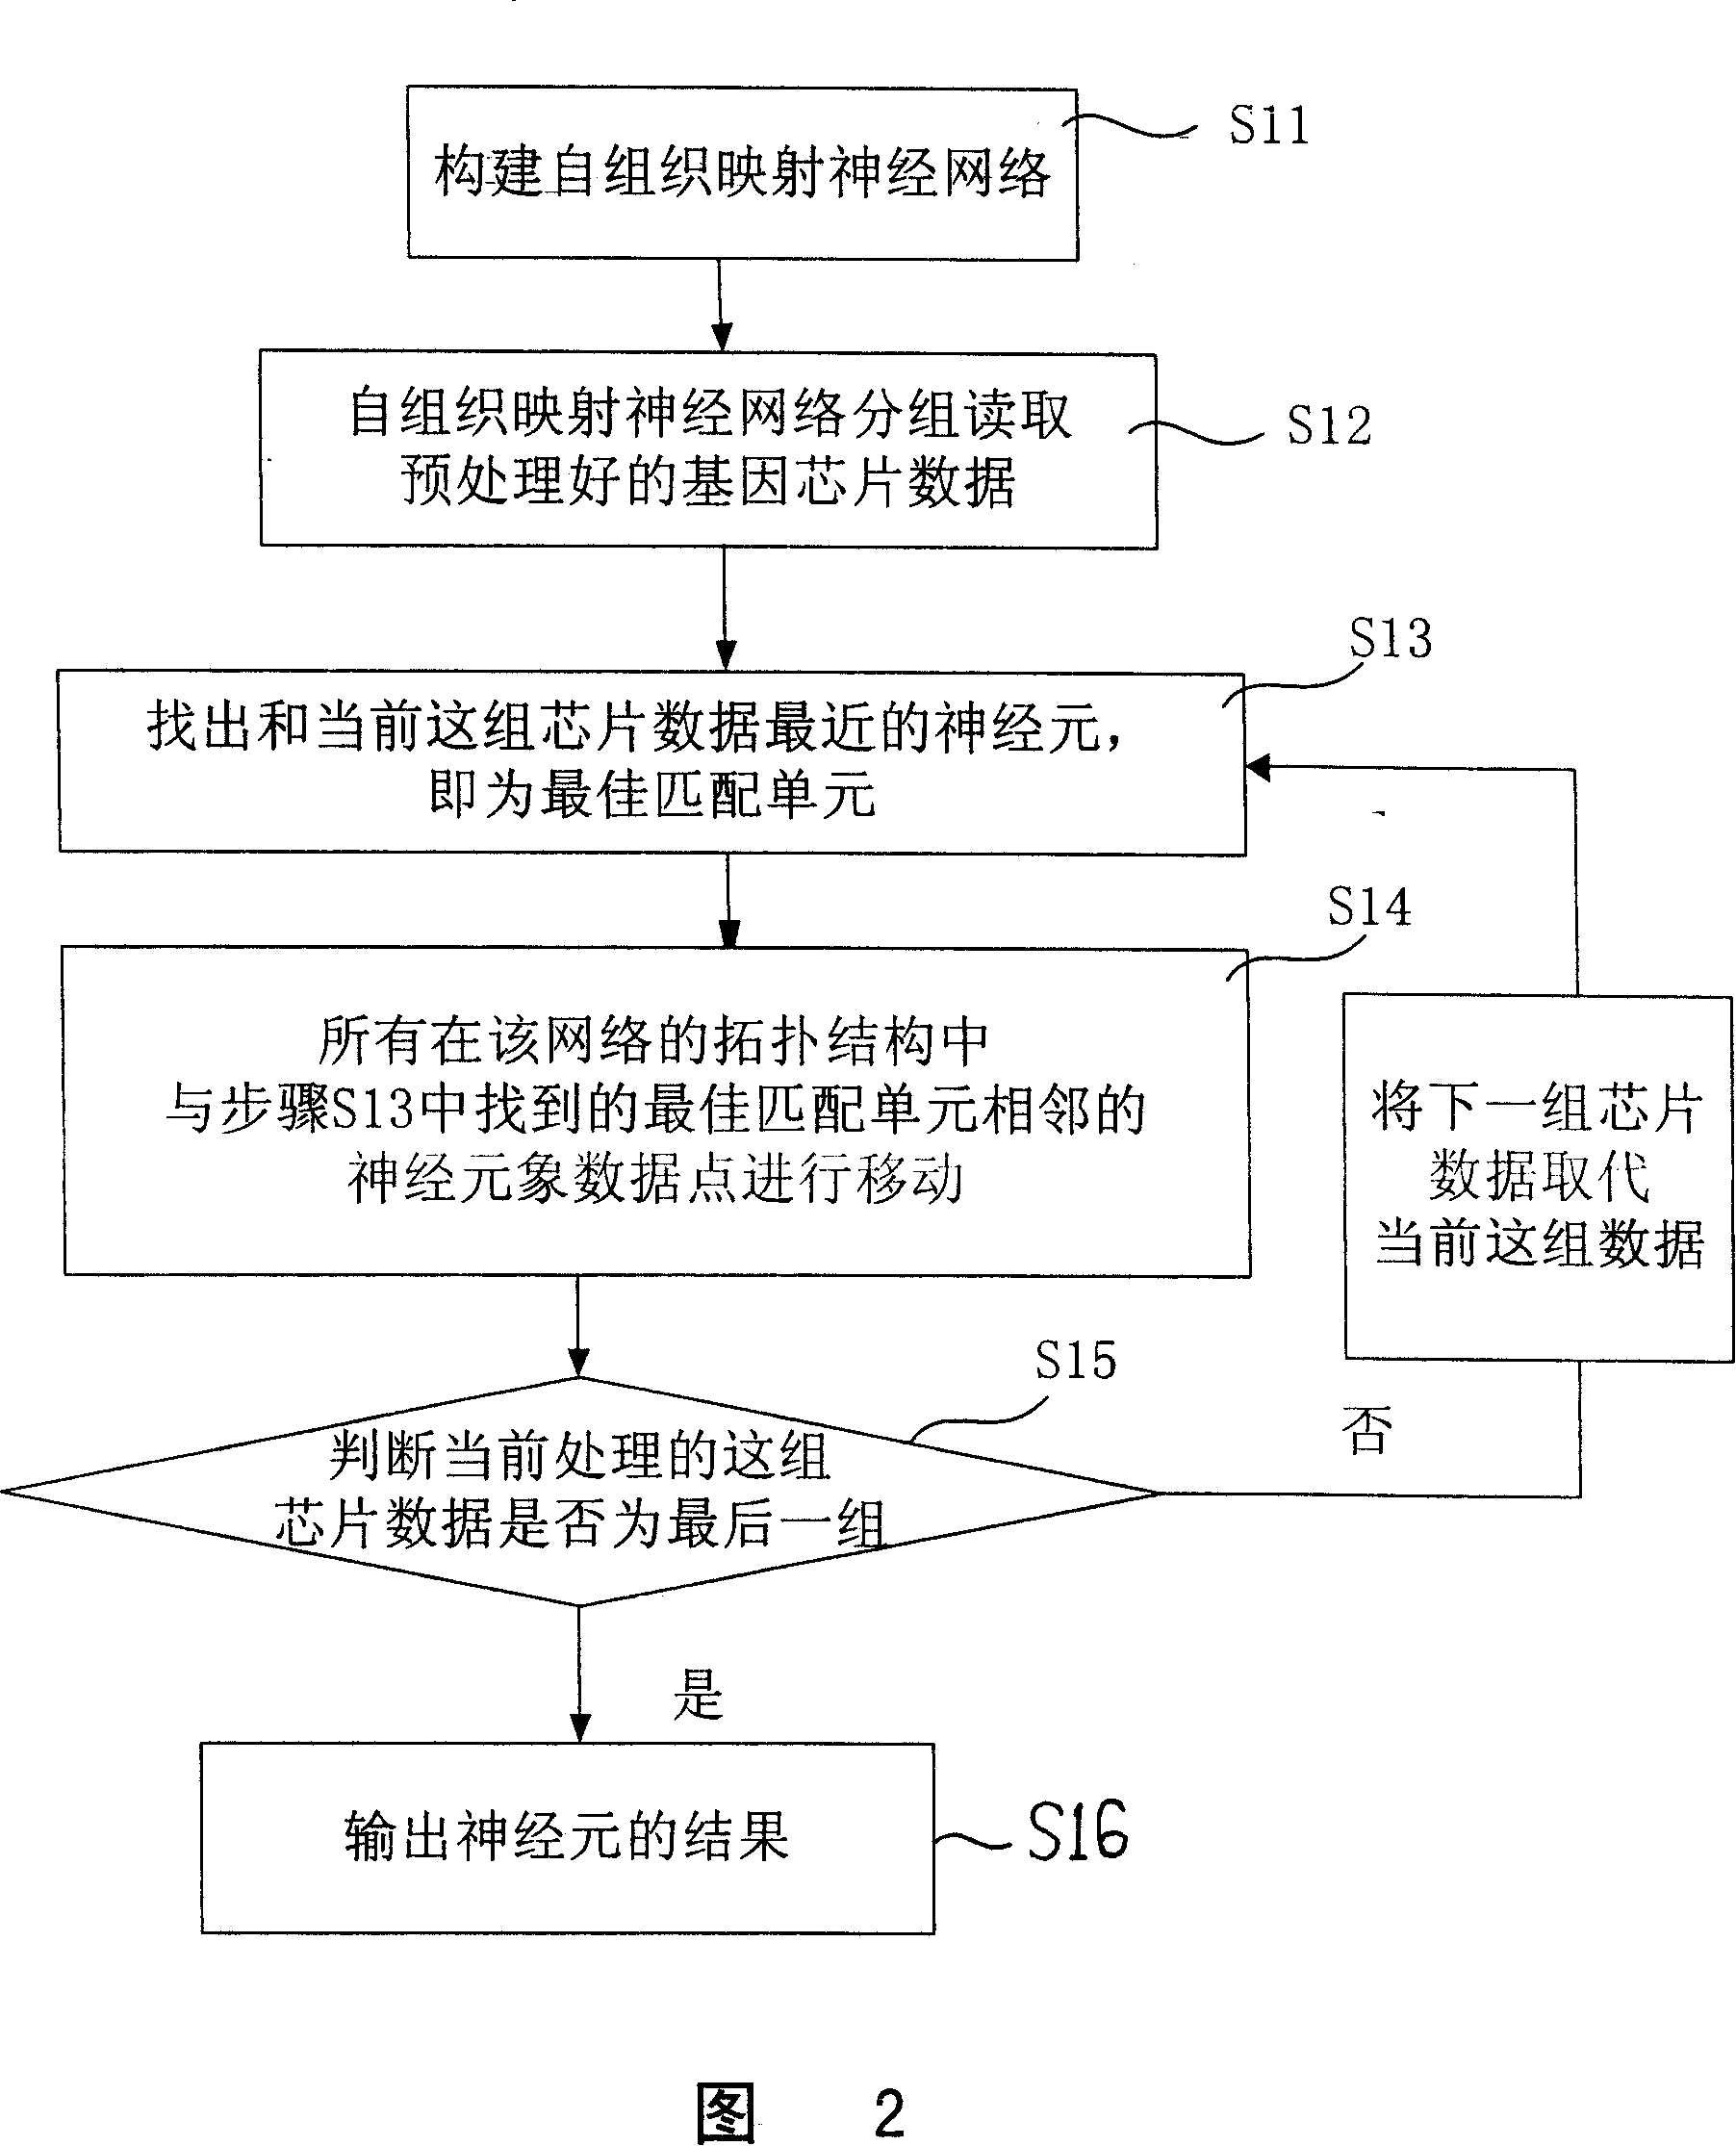 Visual analyzing and displaying method used for chip data analysis